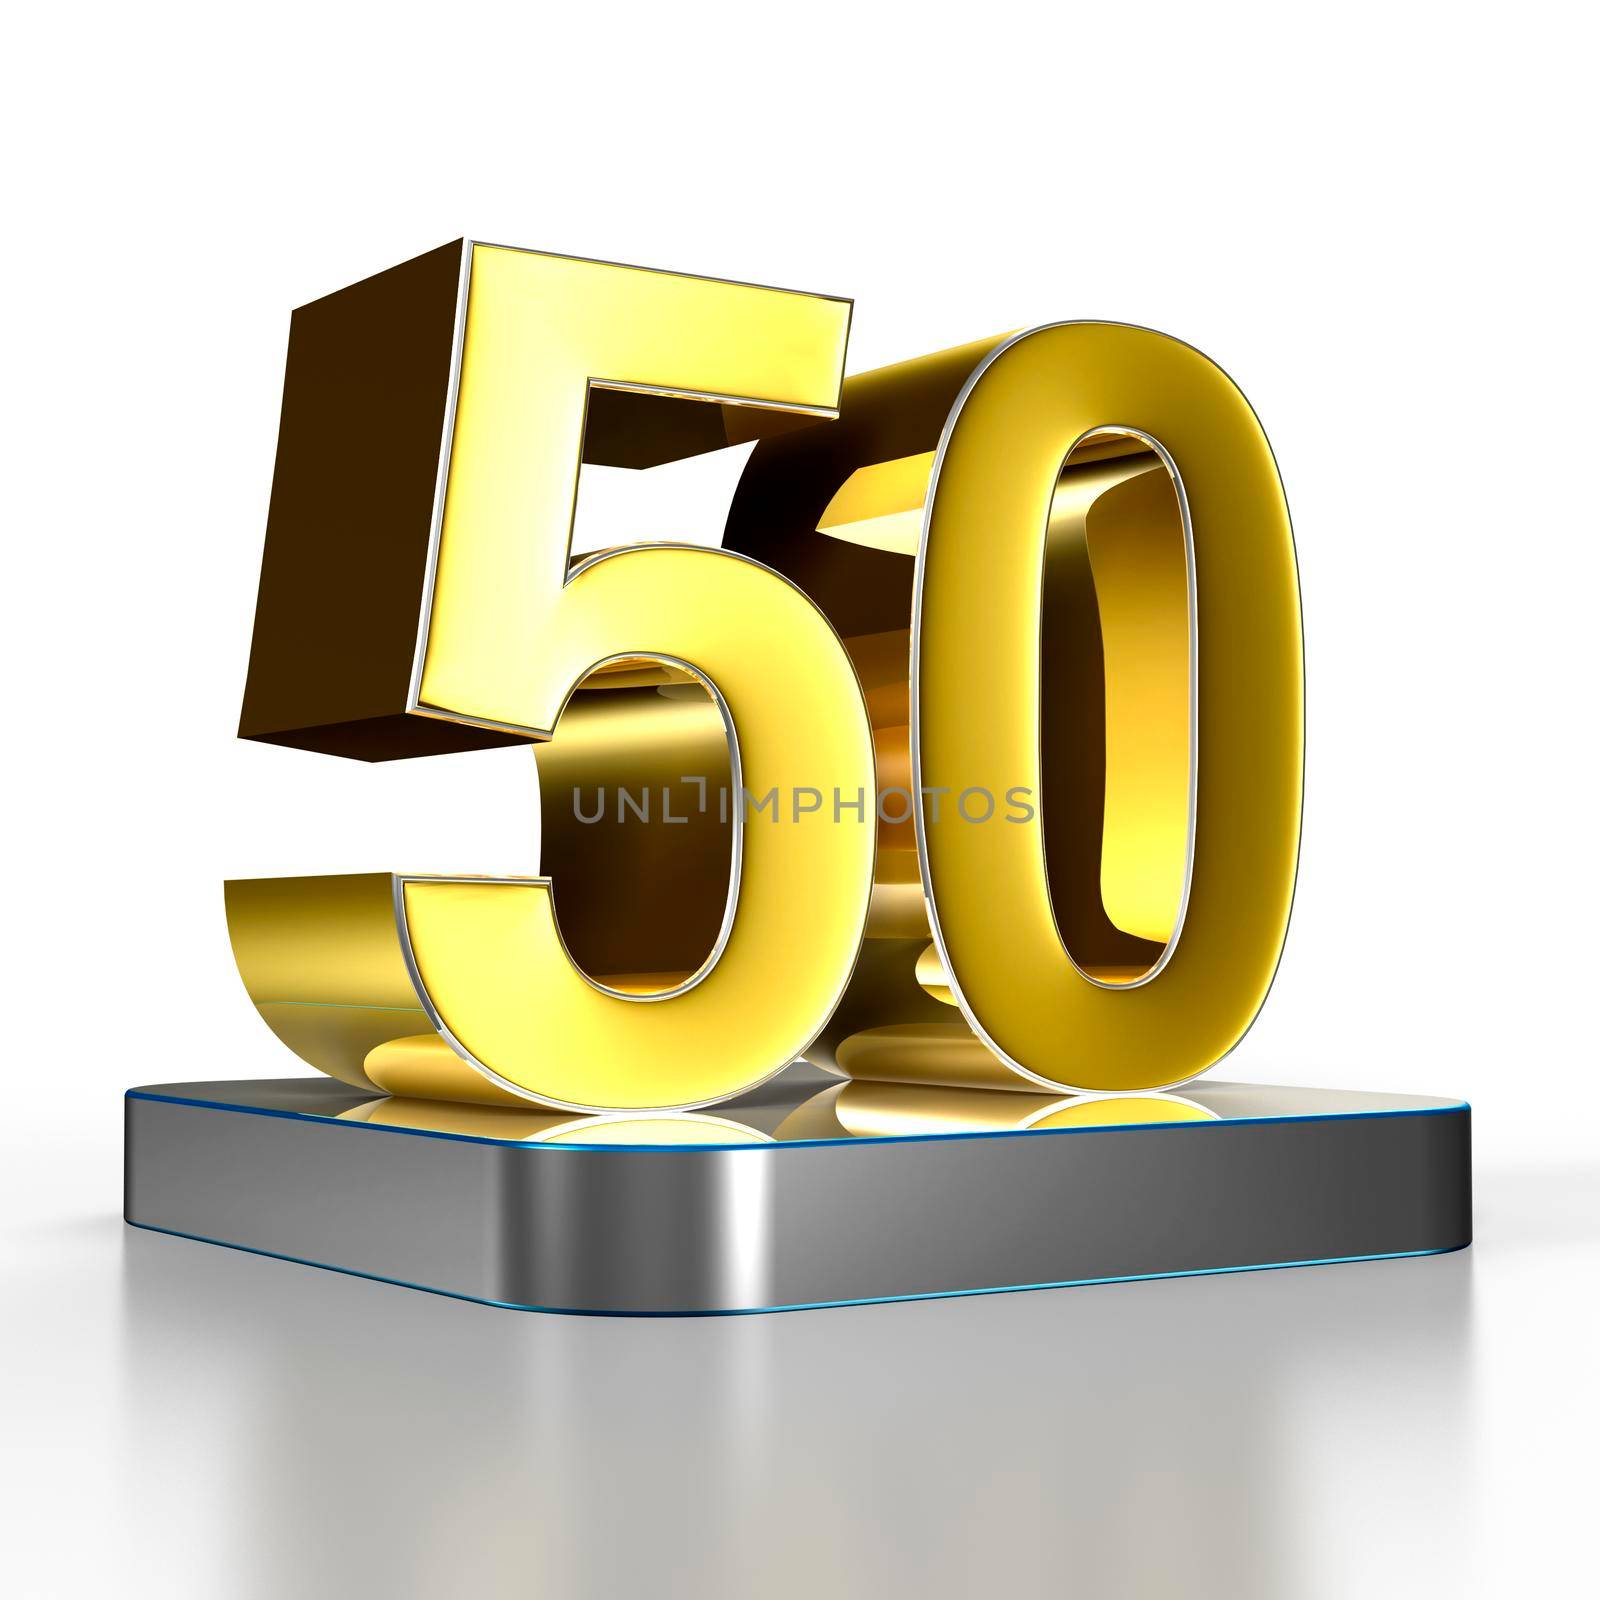 Numbers 50 gold are on a stainless steel platform illustration 3D rendering with clipping path. by thitimontoyai